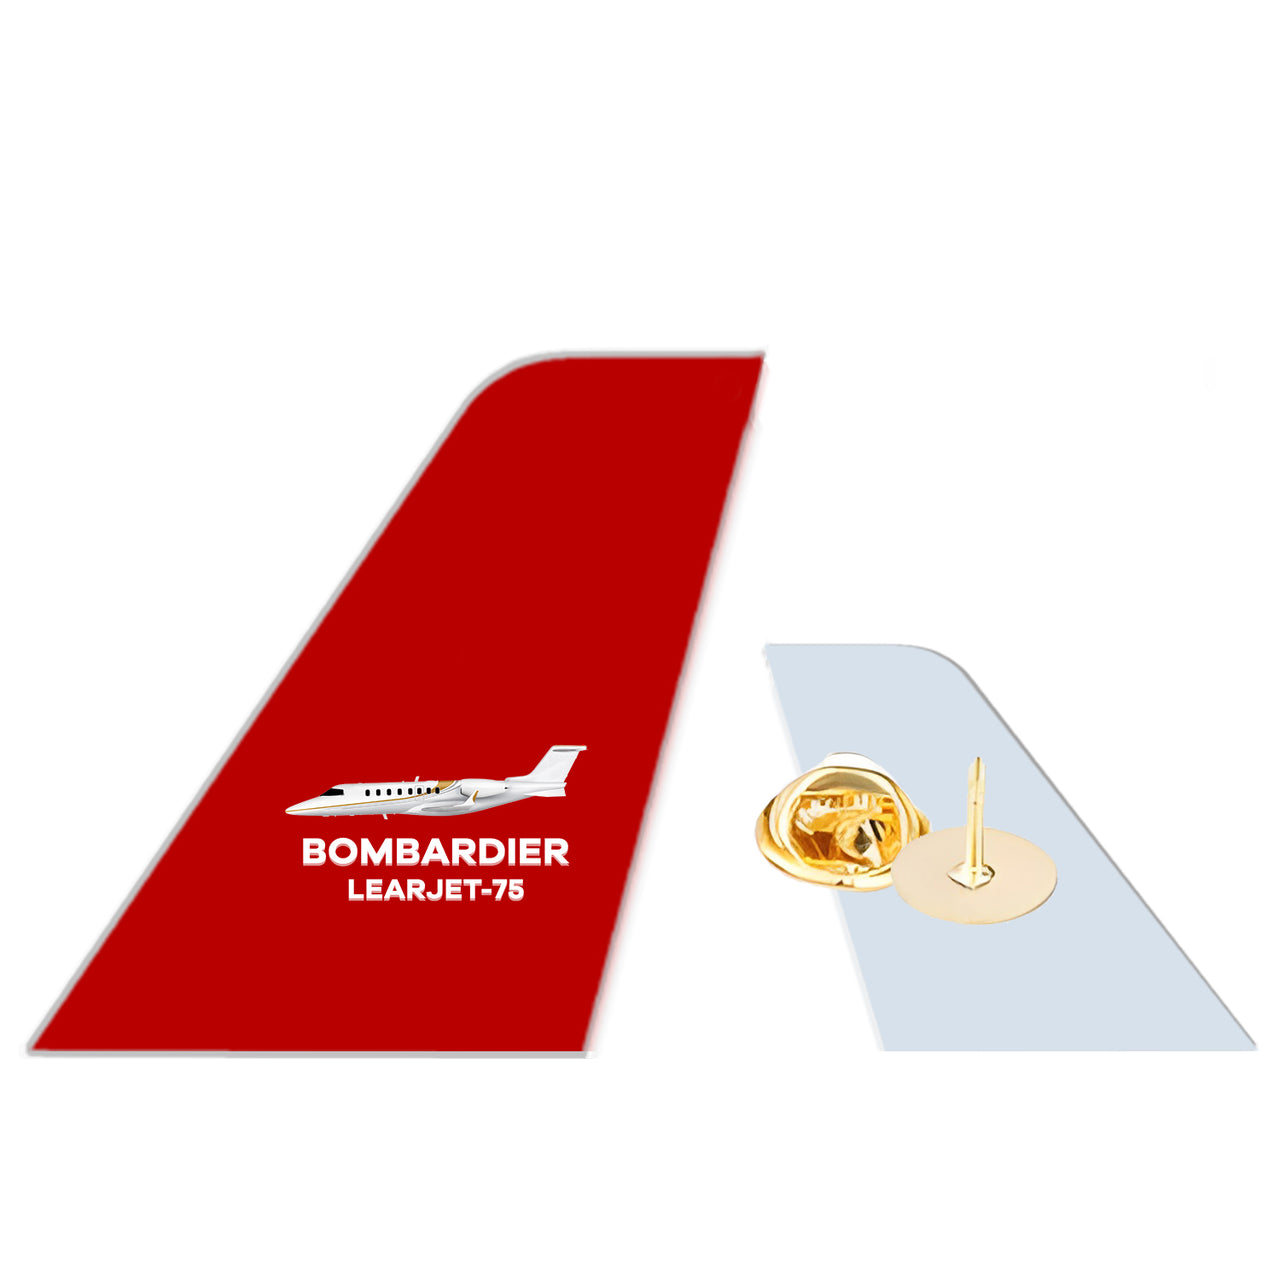 The Bombardier Learjet 75 Designed Tail Shape Badges & Pins